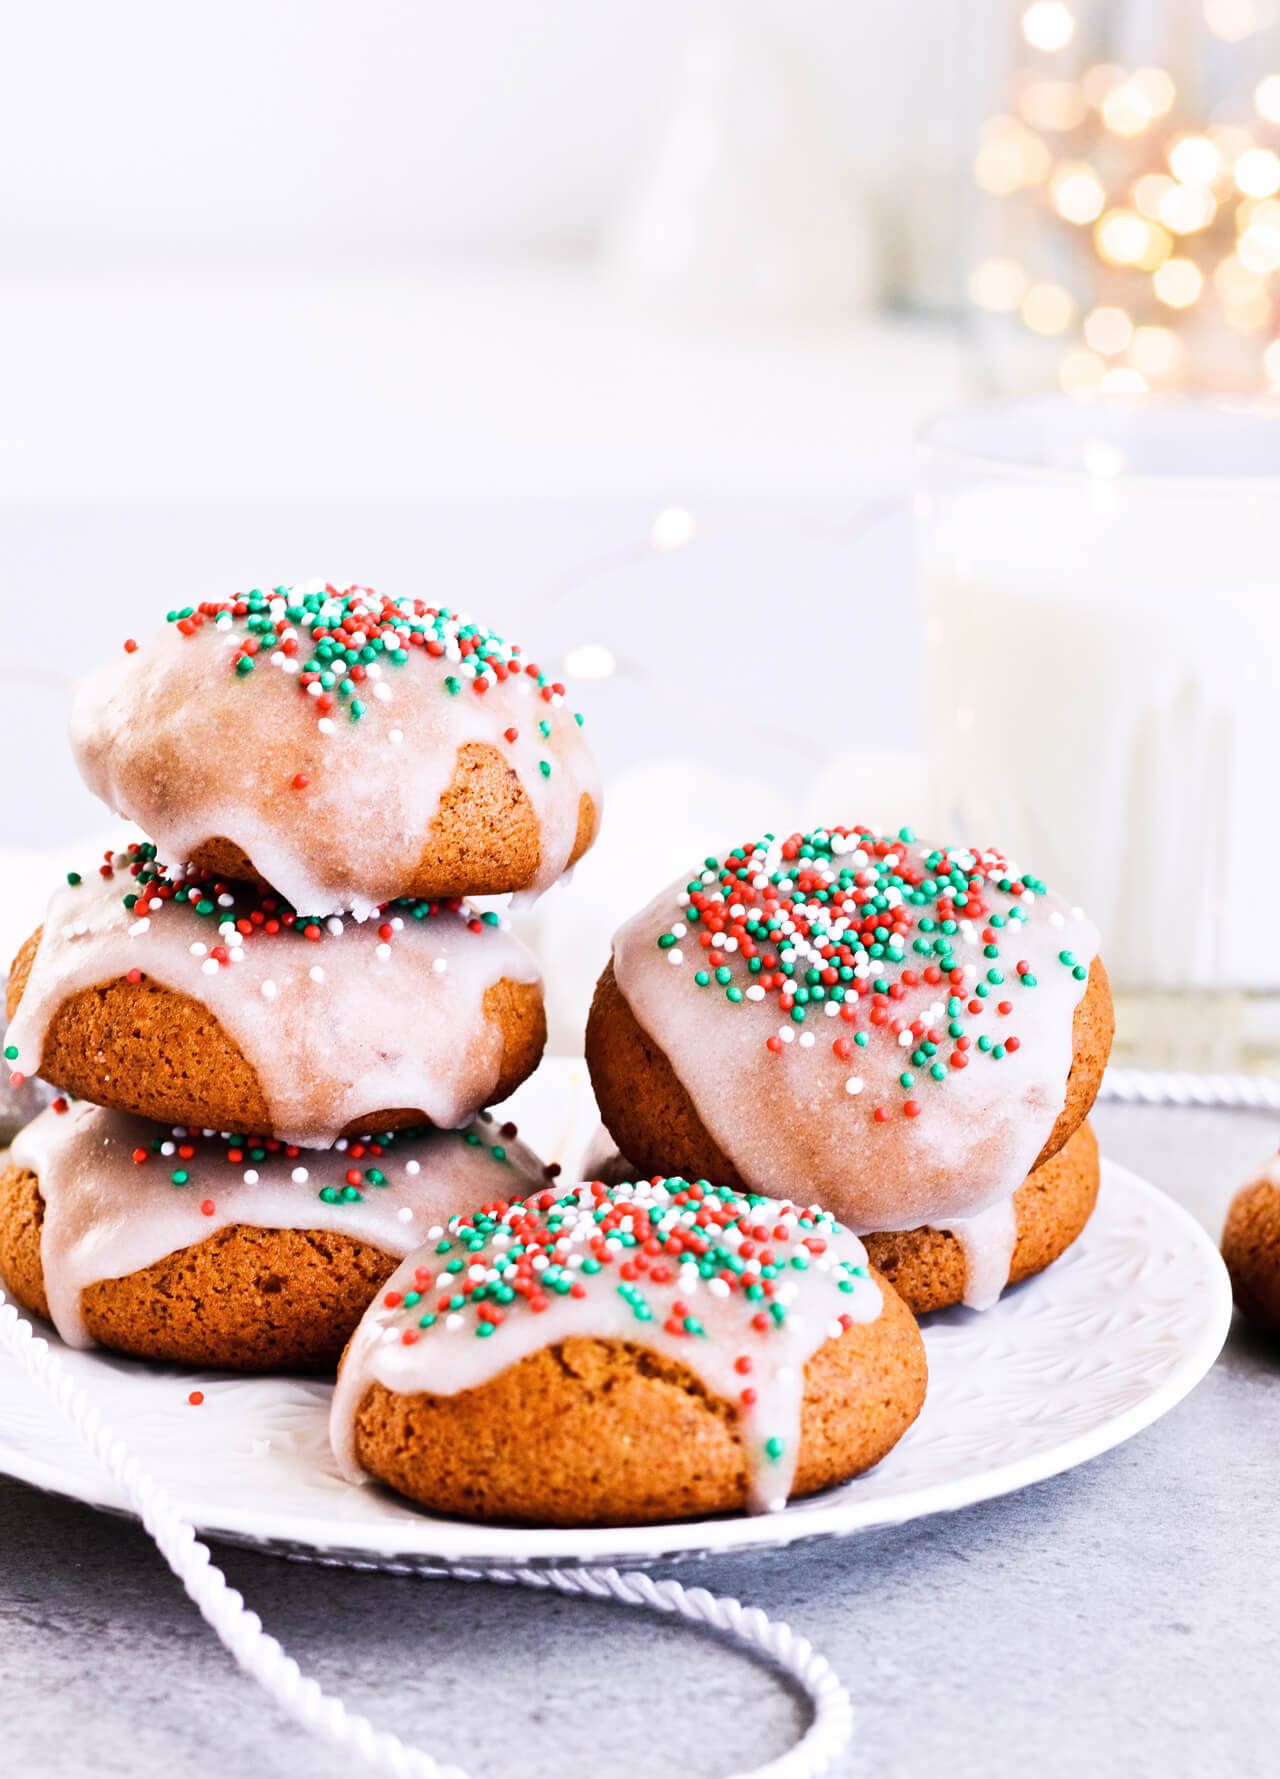 Recipe for Sugar glazed lebkuchen (German Christmas cookies), the perfect spicy and sweet cookies. Great for Christmas or any cold month, they're filled with honey and wonderful, aromatic spices. The festive sprinkles add that extra holiday touch. | @mitzyathome sugarsalted.com